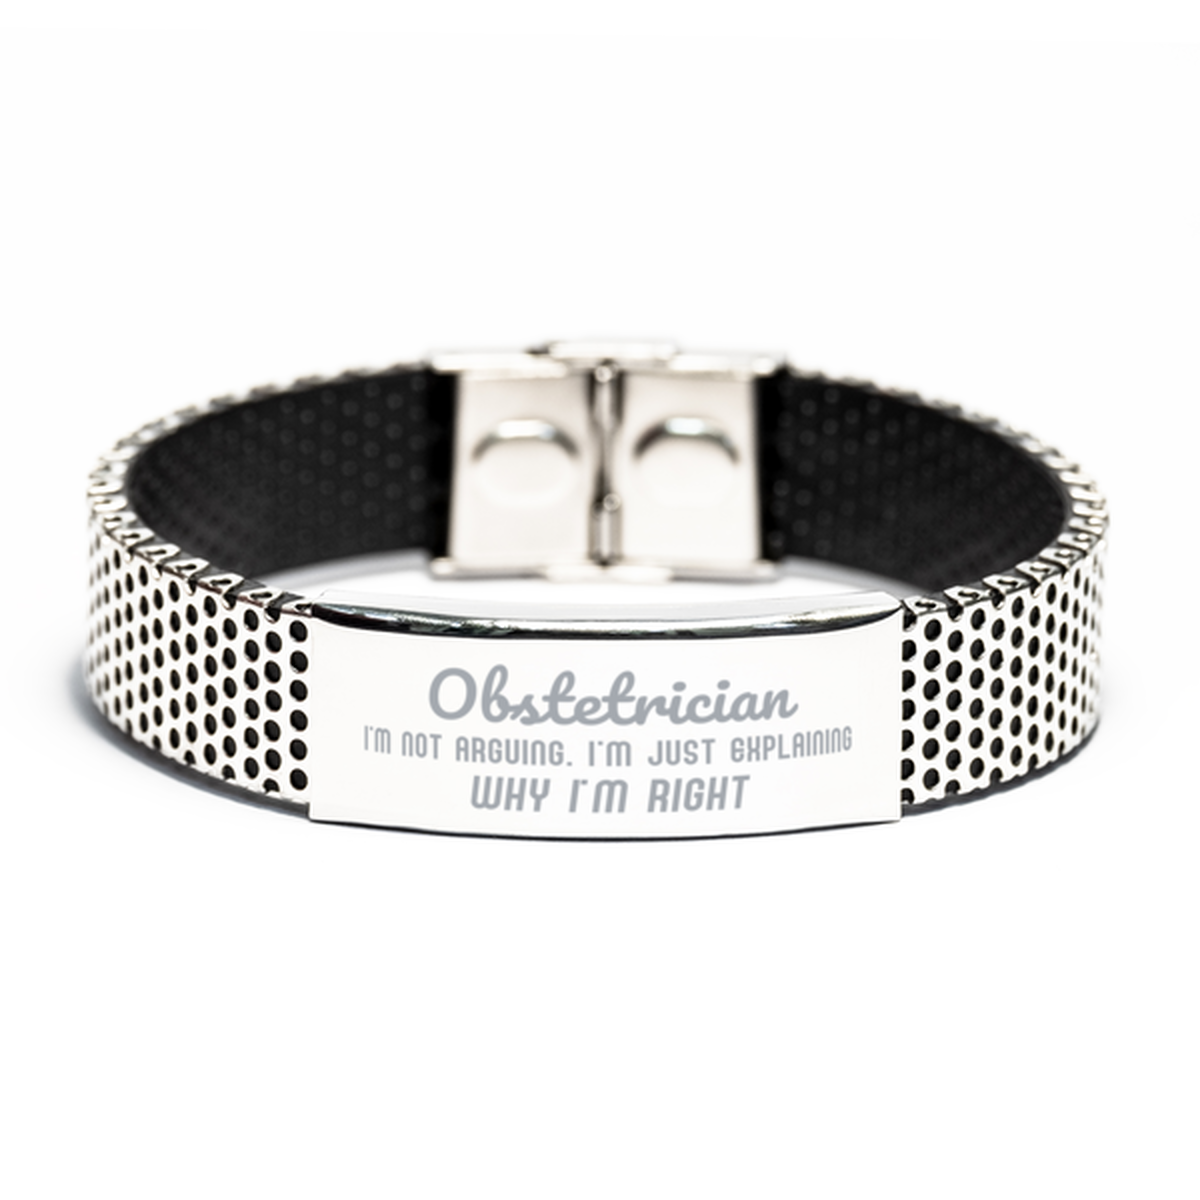 Obstetrician I'm not Arguing. I'm Just Explaining Why I'm RIGHT Stainless Steel Bracelet, Funny Saying Quote Obstetrician Gifts For Obstetrician Graduation Birthday Christmas Gifts for Men Women Coworker